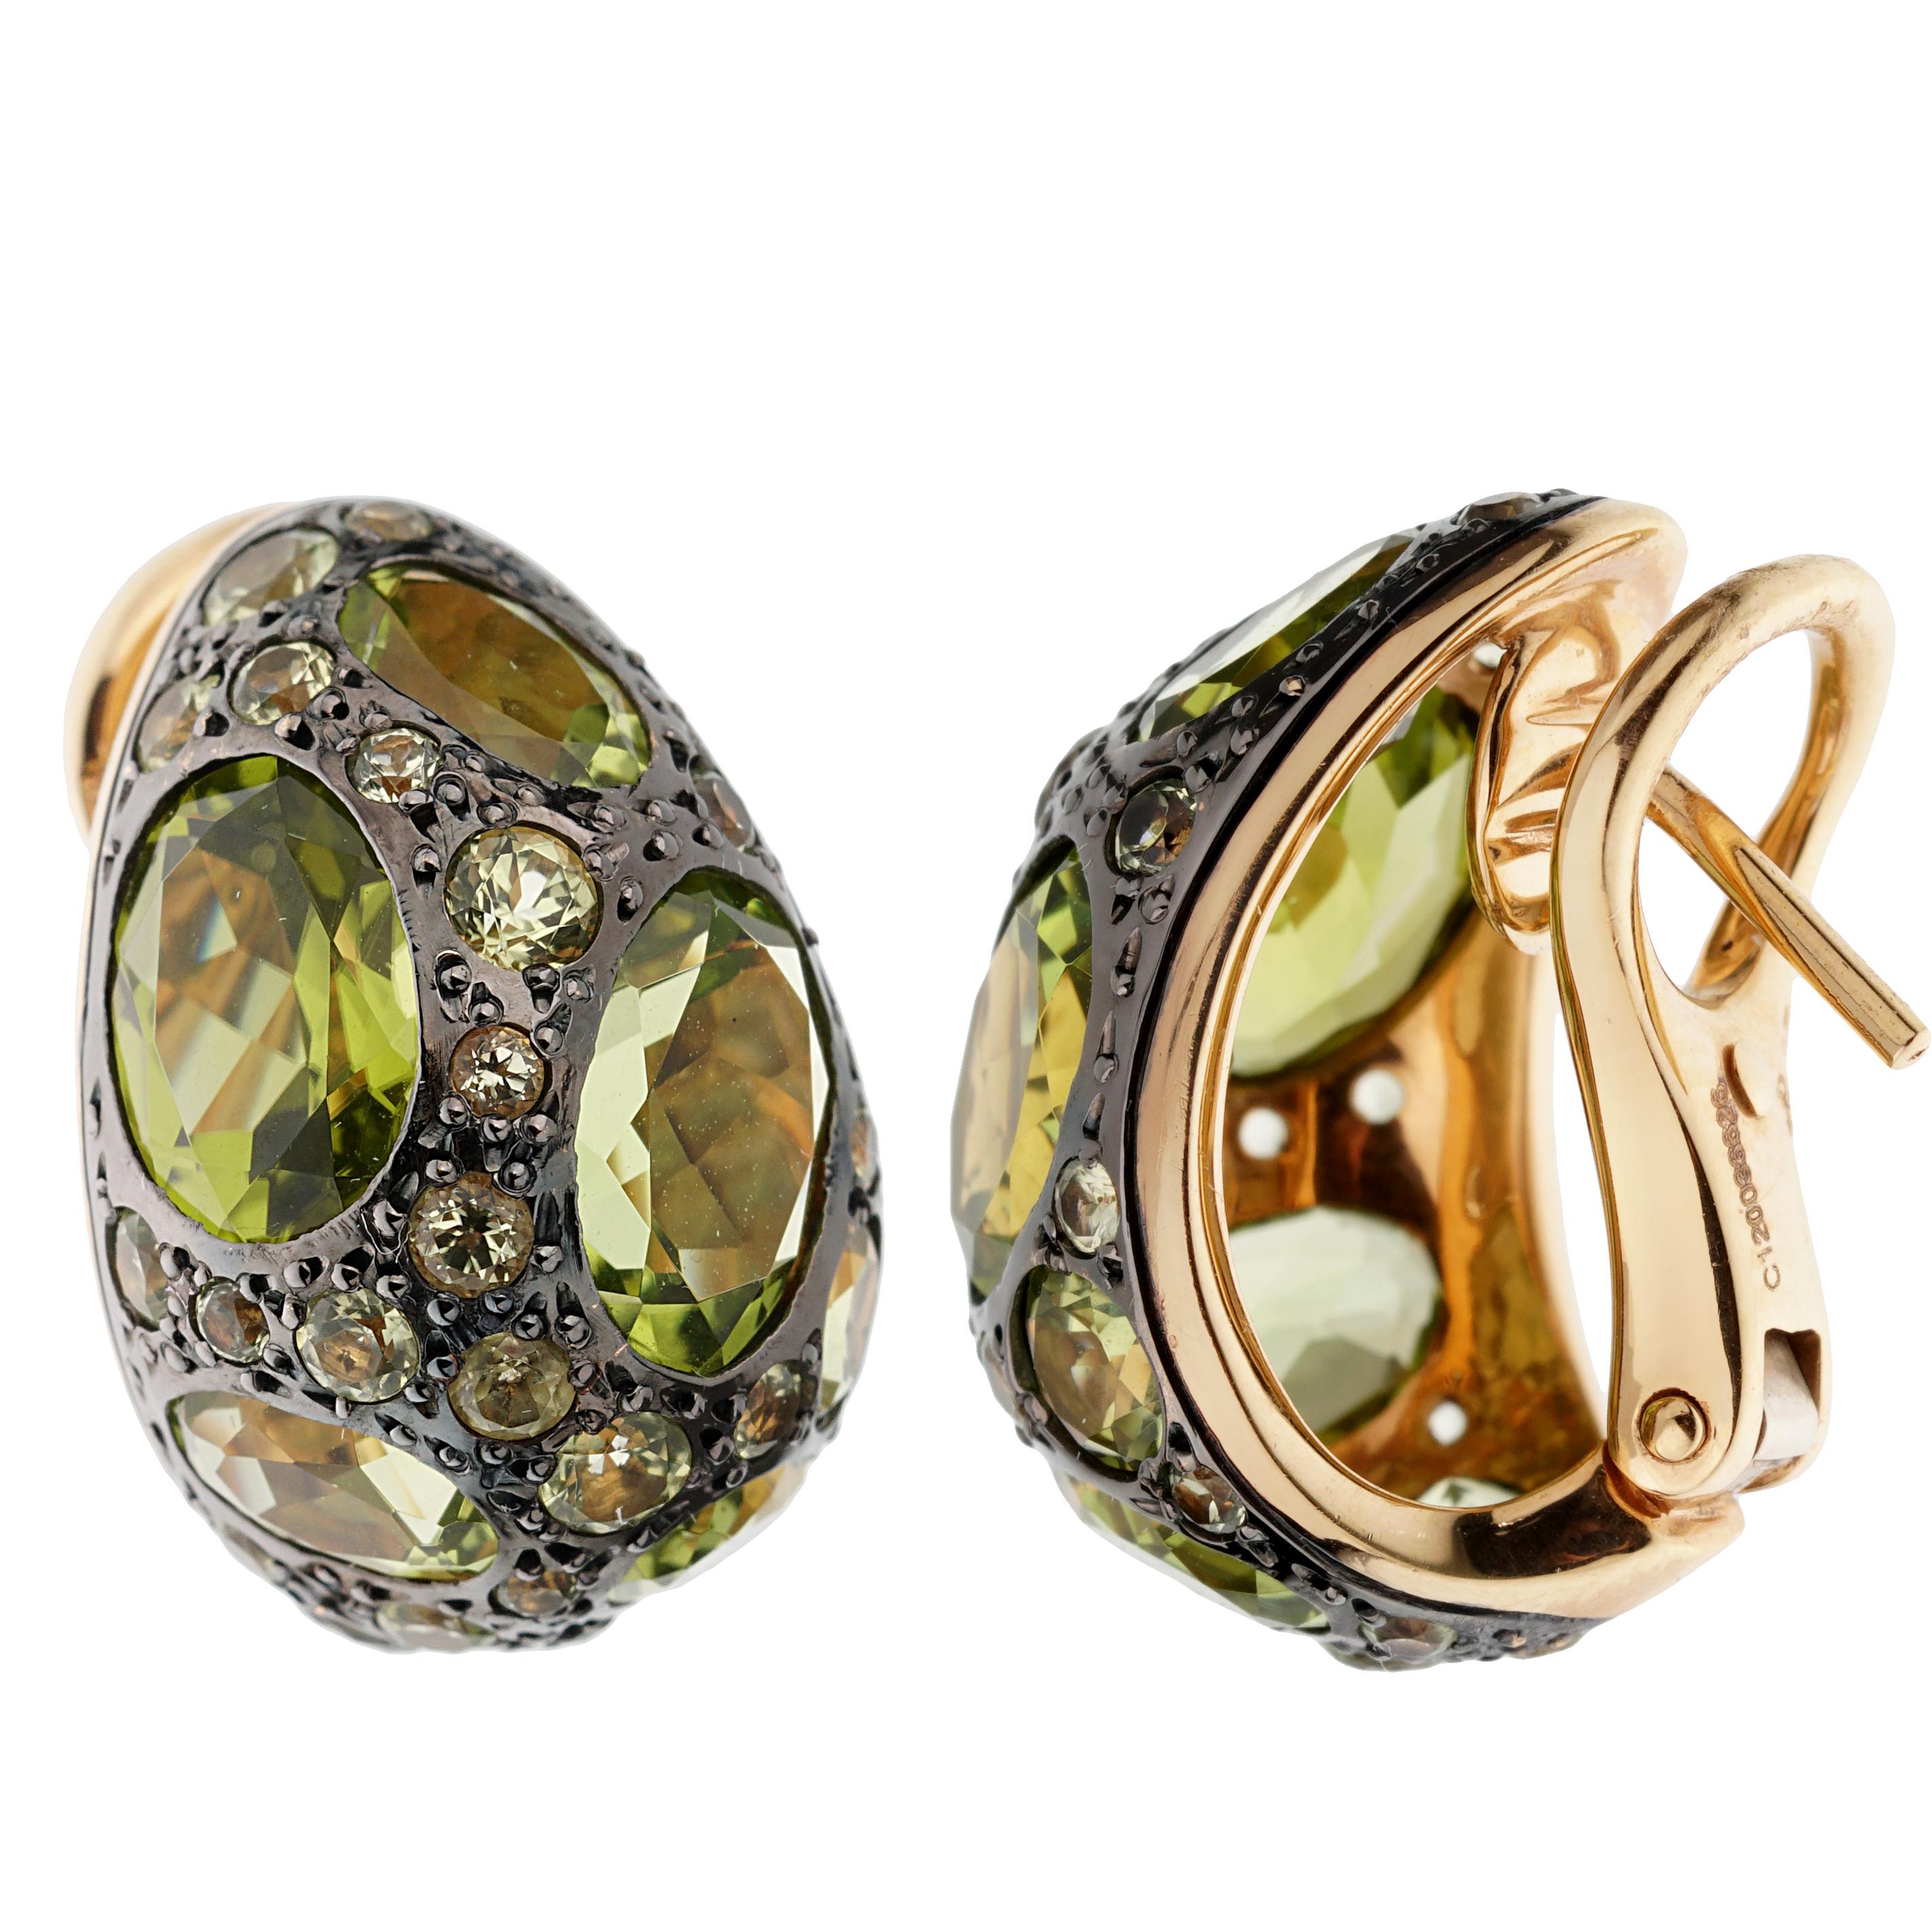 A fabulous set of Pomellato earrings from the Tabou collection showcasing burnished rose gold and embellished with intensely-coloured peridot stones with a faceted surface. The earrings measure .65